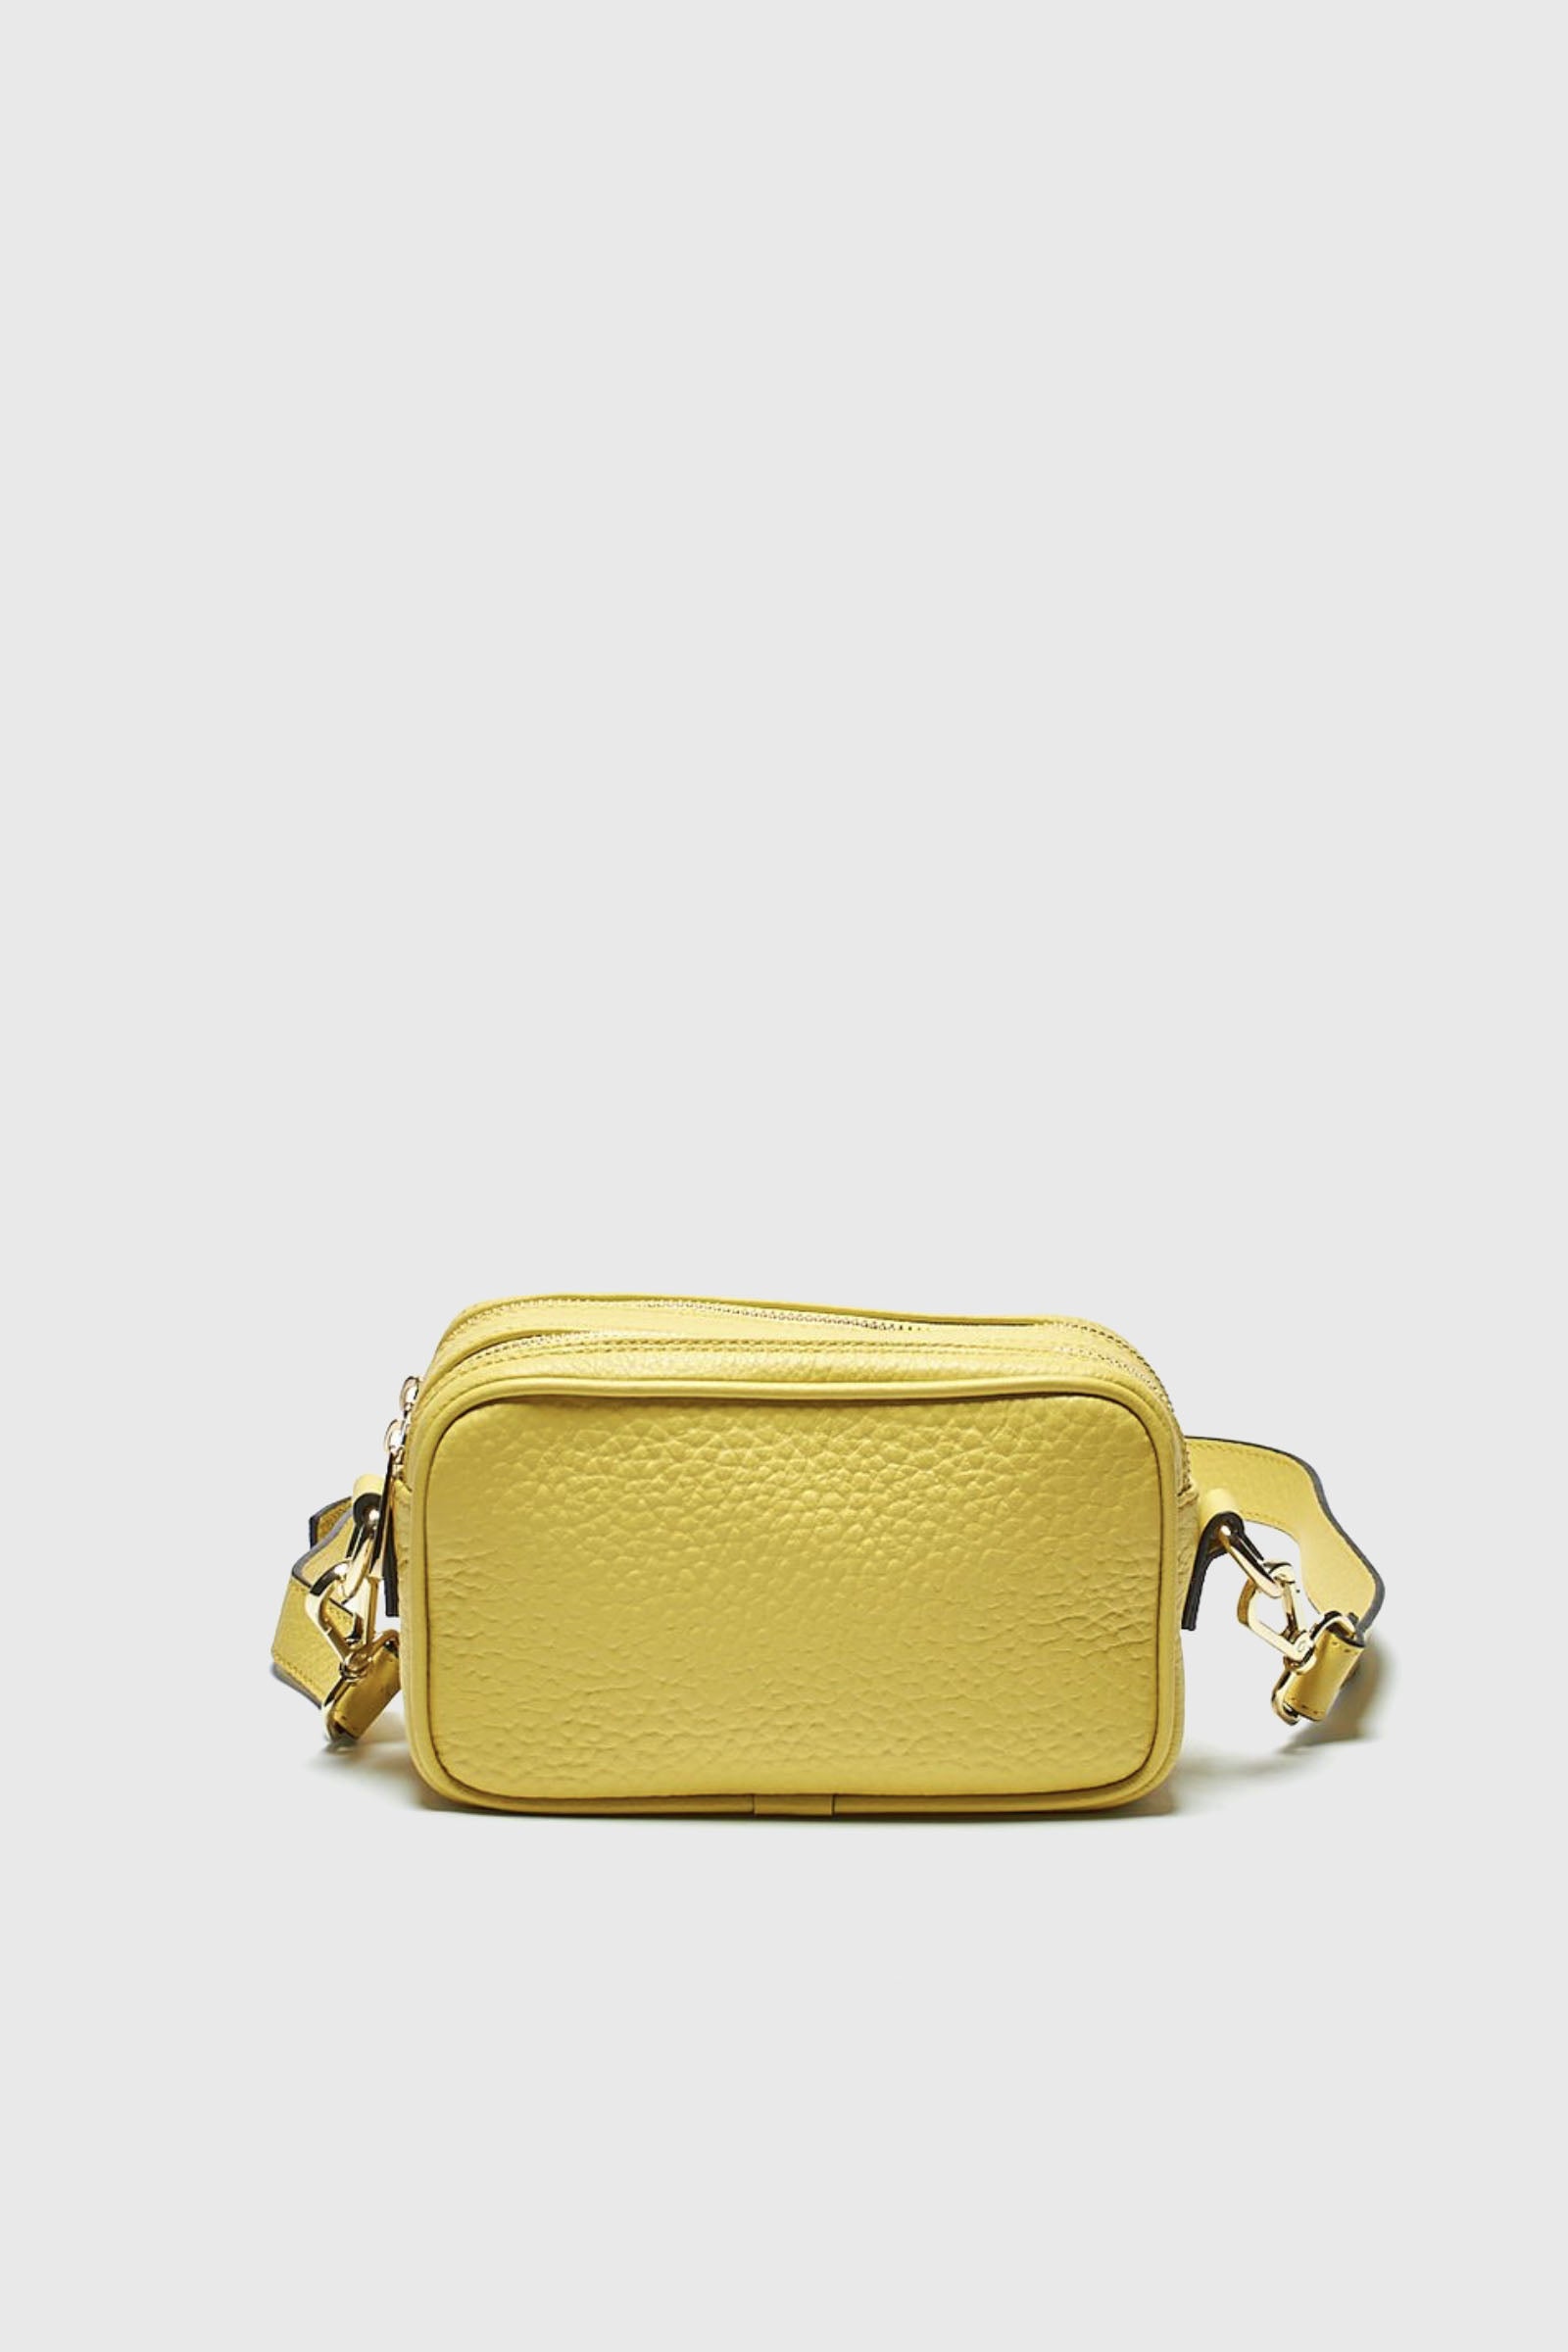 Avenue 67 Gabrielle Leather Bag Yellow - 4